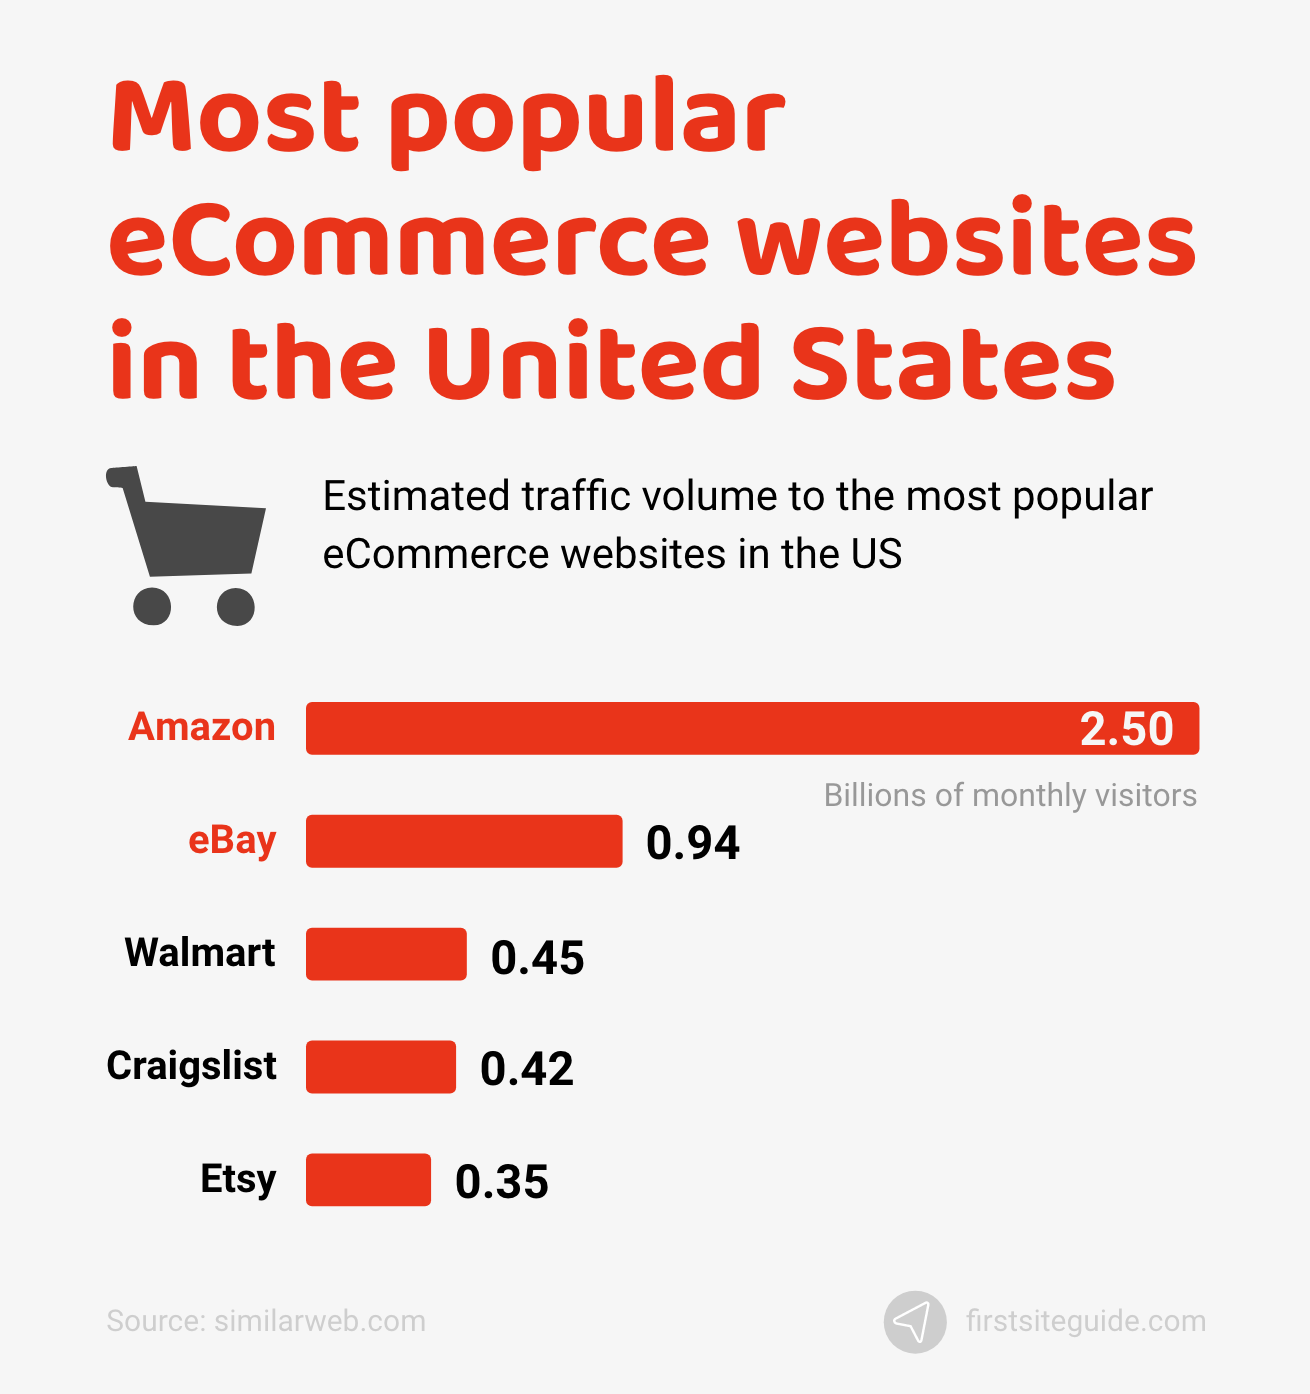 Most popular eCommerce websites in the United States